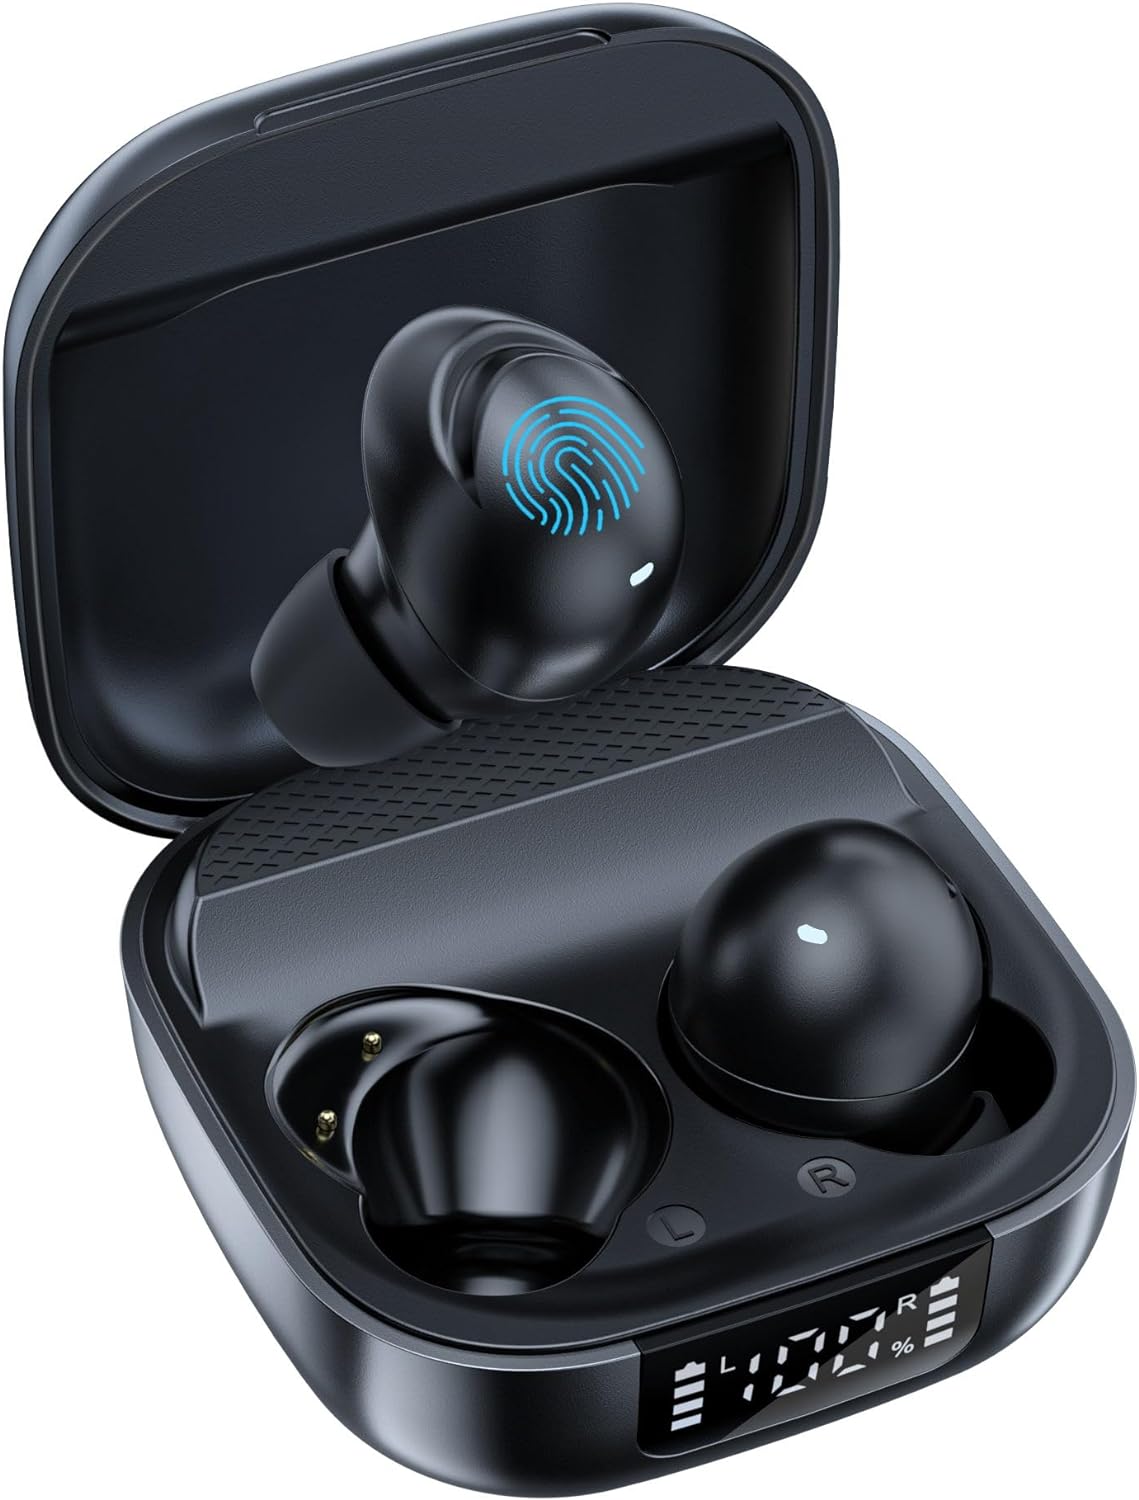 Wireless Earbuds for Android, Wireless Earbuds Bluetooth 5.3 Headphones Stereo Bass LED Display in Ear Earphones 32H Playtime Waterproof Ear Buds Built in Mic for Samsung/iPhone/TV/Window